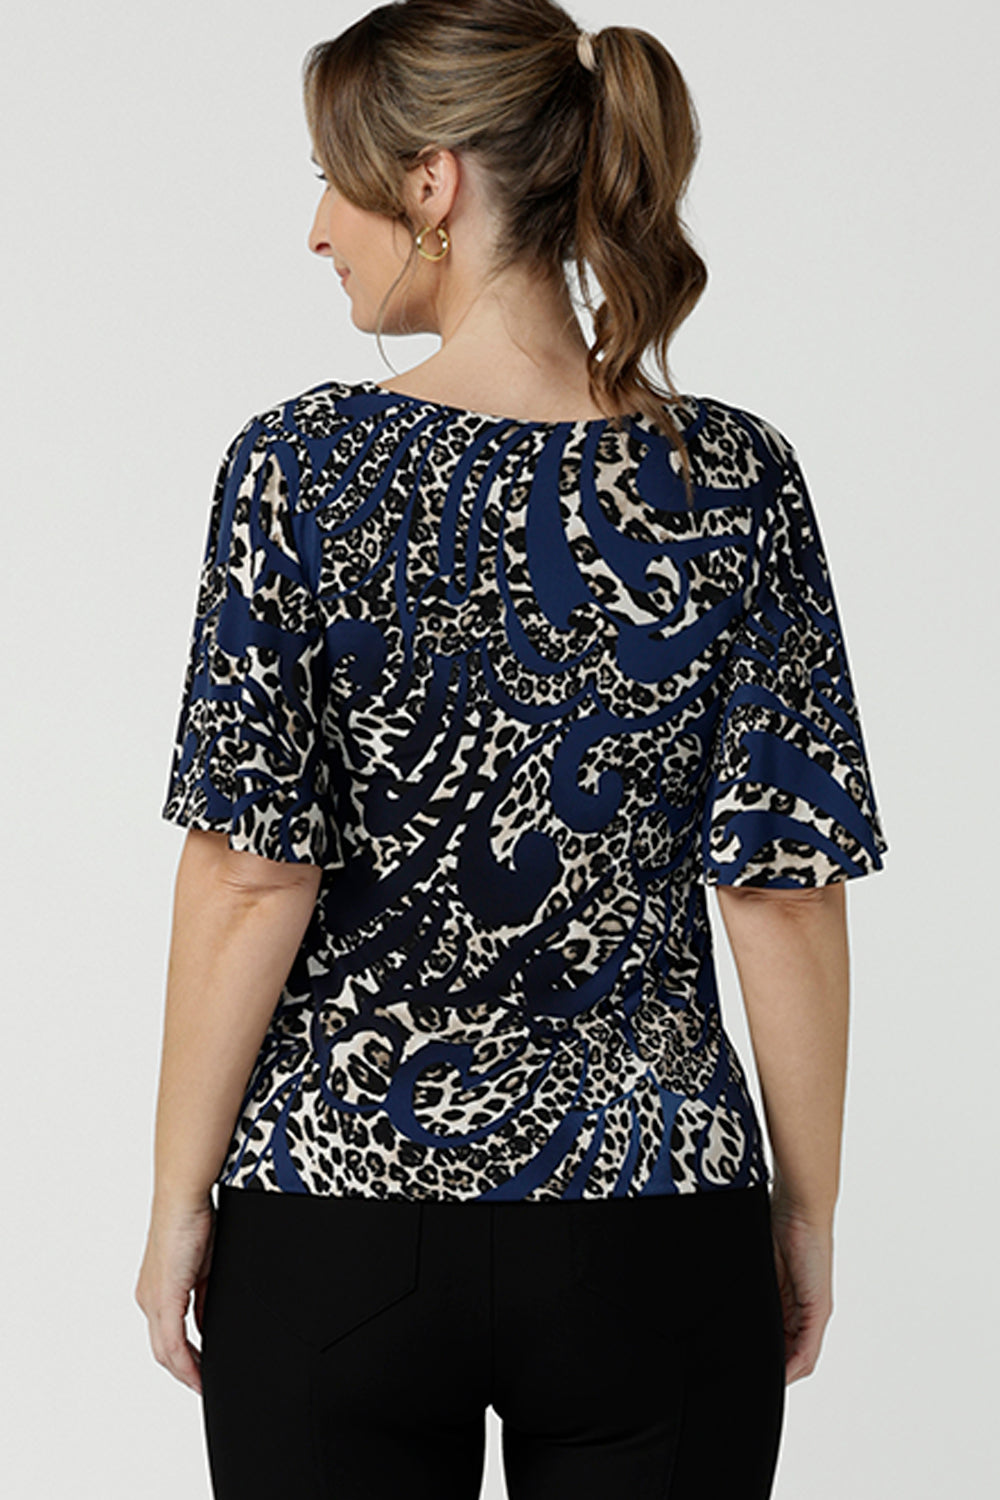 Back view of A size 10 over 40 year old woman wears a jersey top in animal print on a navy base, styled with black, fitted pants. This Australian-made women's top has flutter sleeves, a high, round neckline and and high-low hem perfect for weekend casual and travel capsule wardrobes.